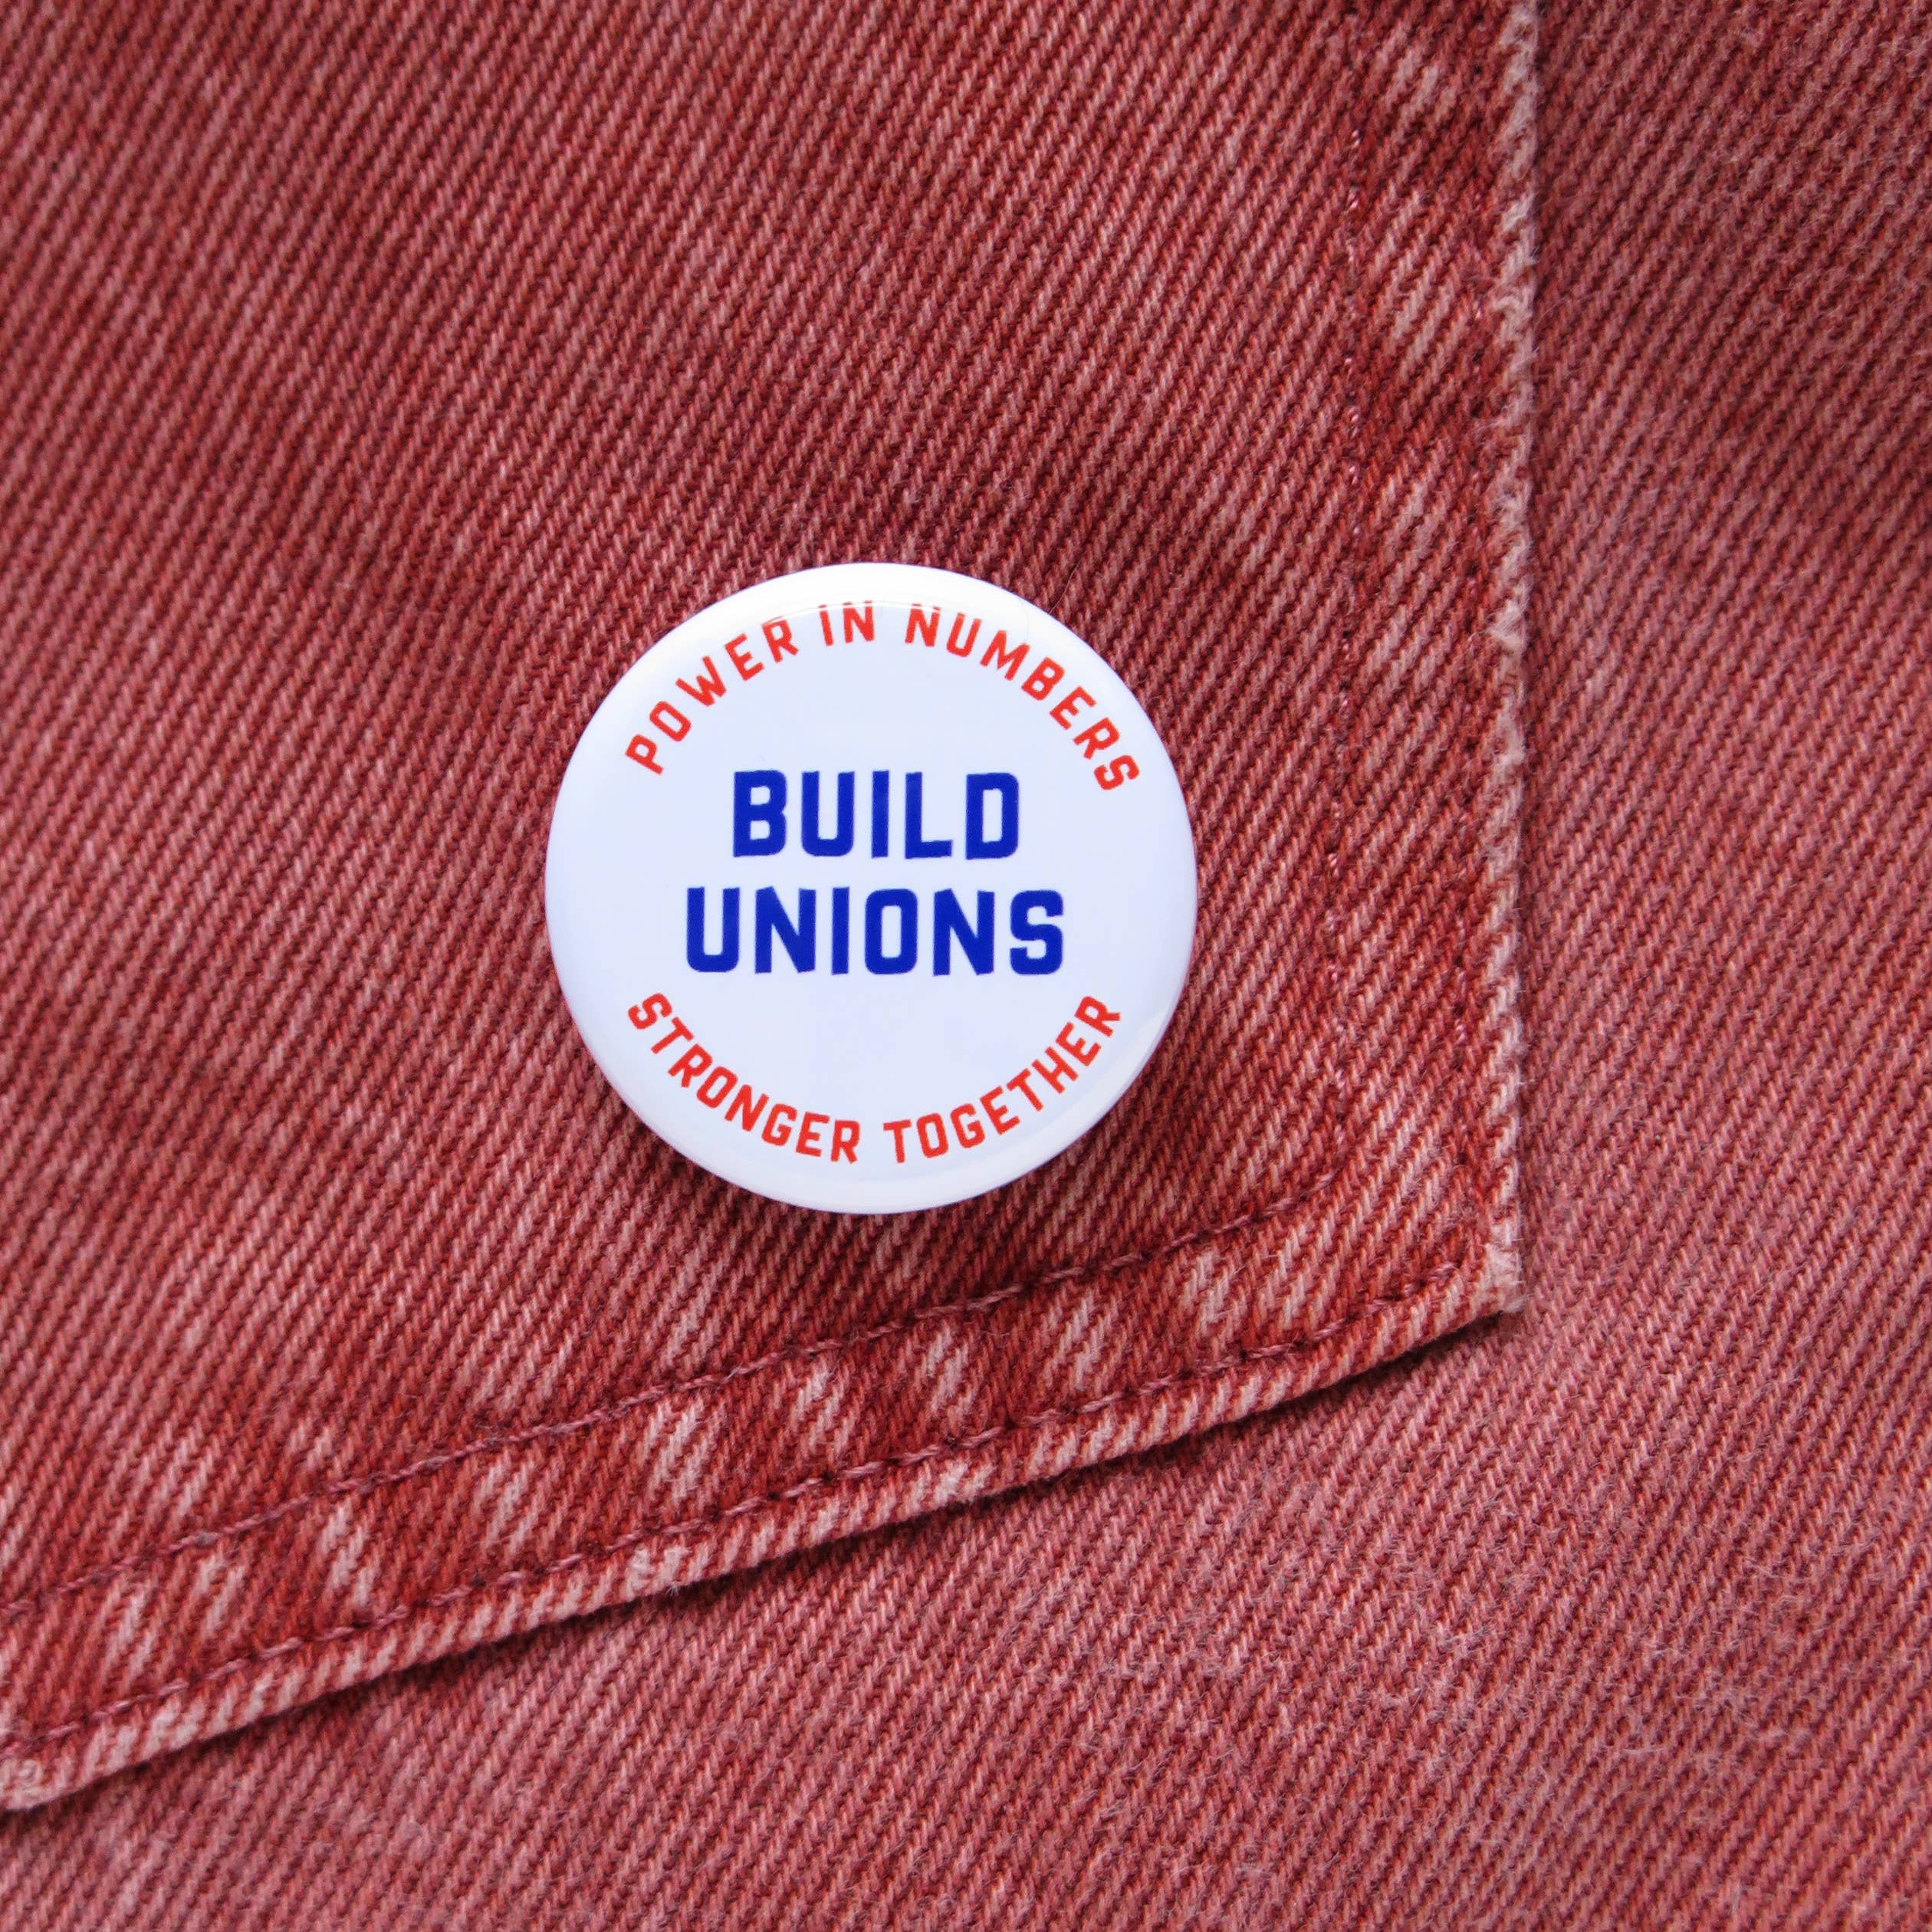 BUILD UNIONS Pinback Buttons social justice labor gift